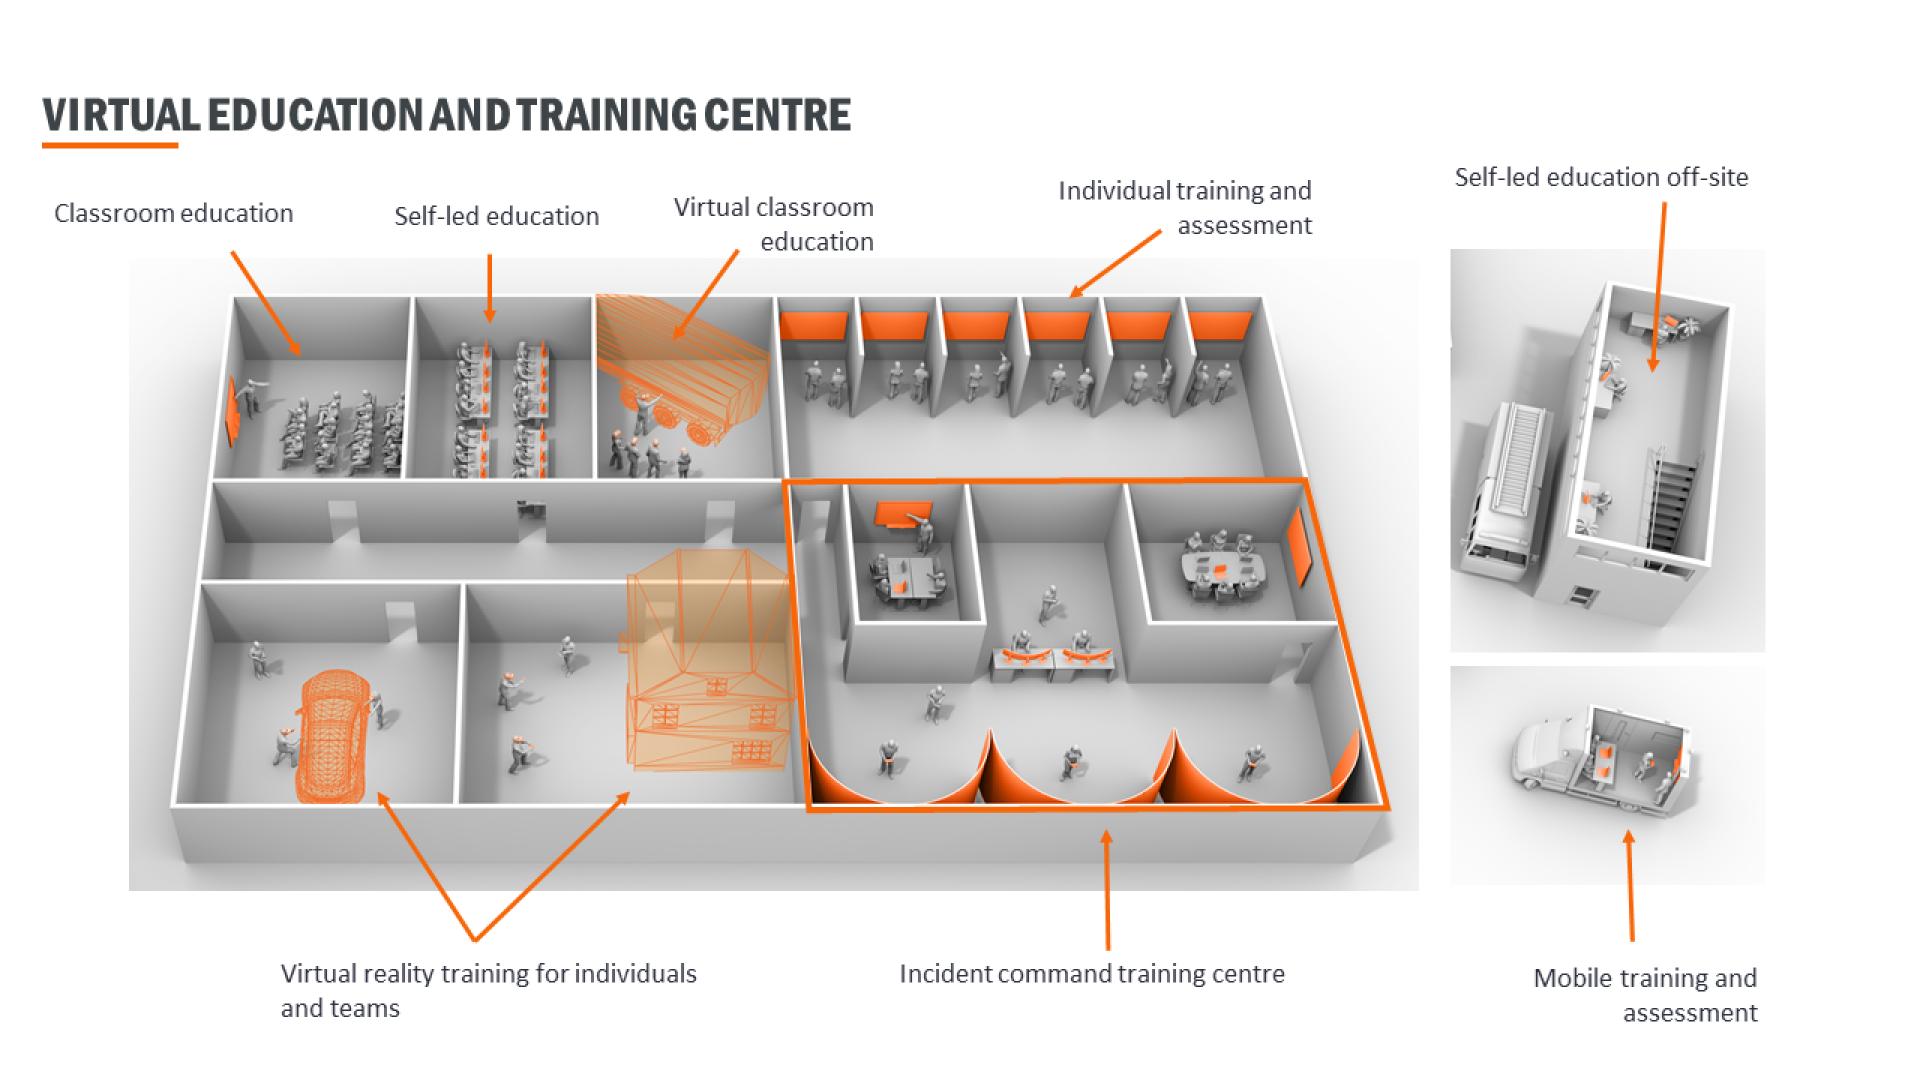 Overview of an XVR equipped training centre